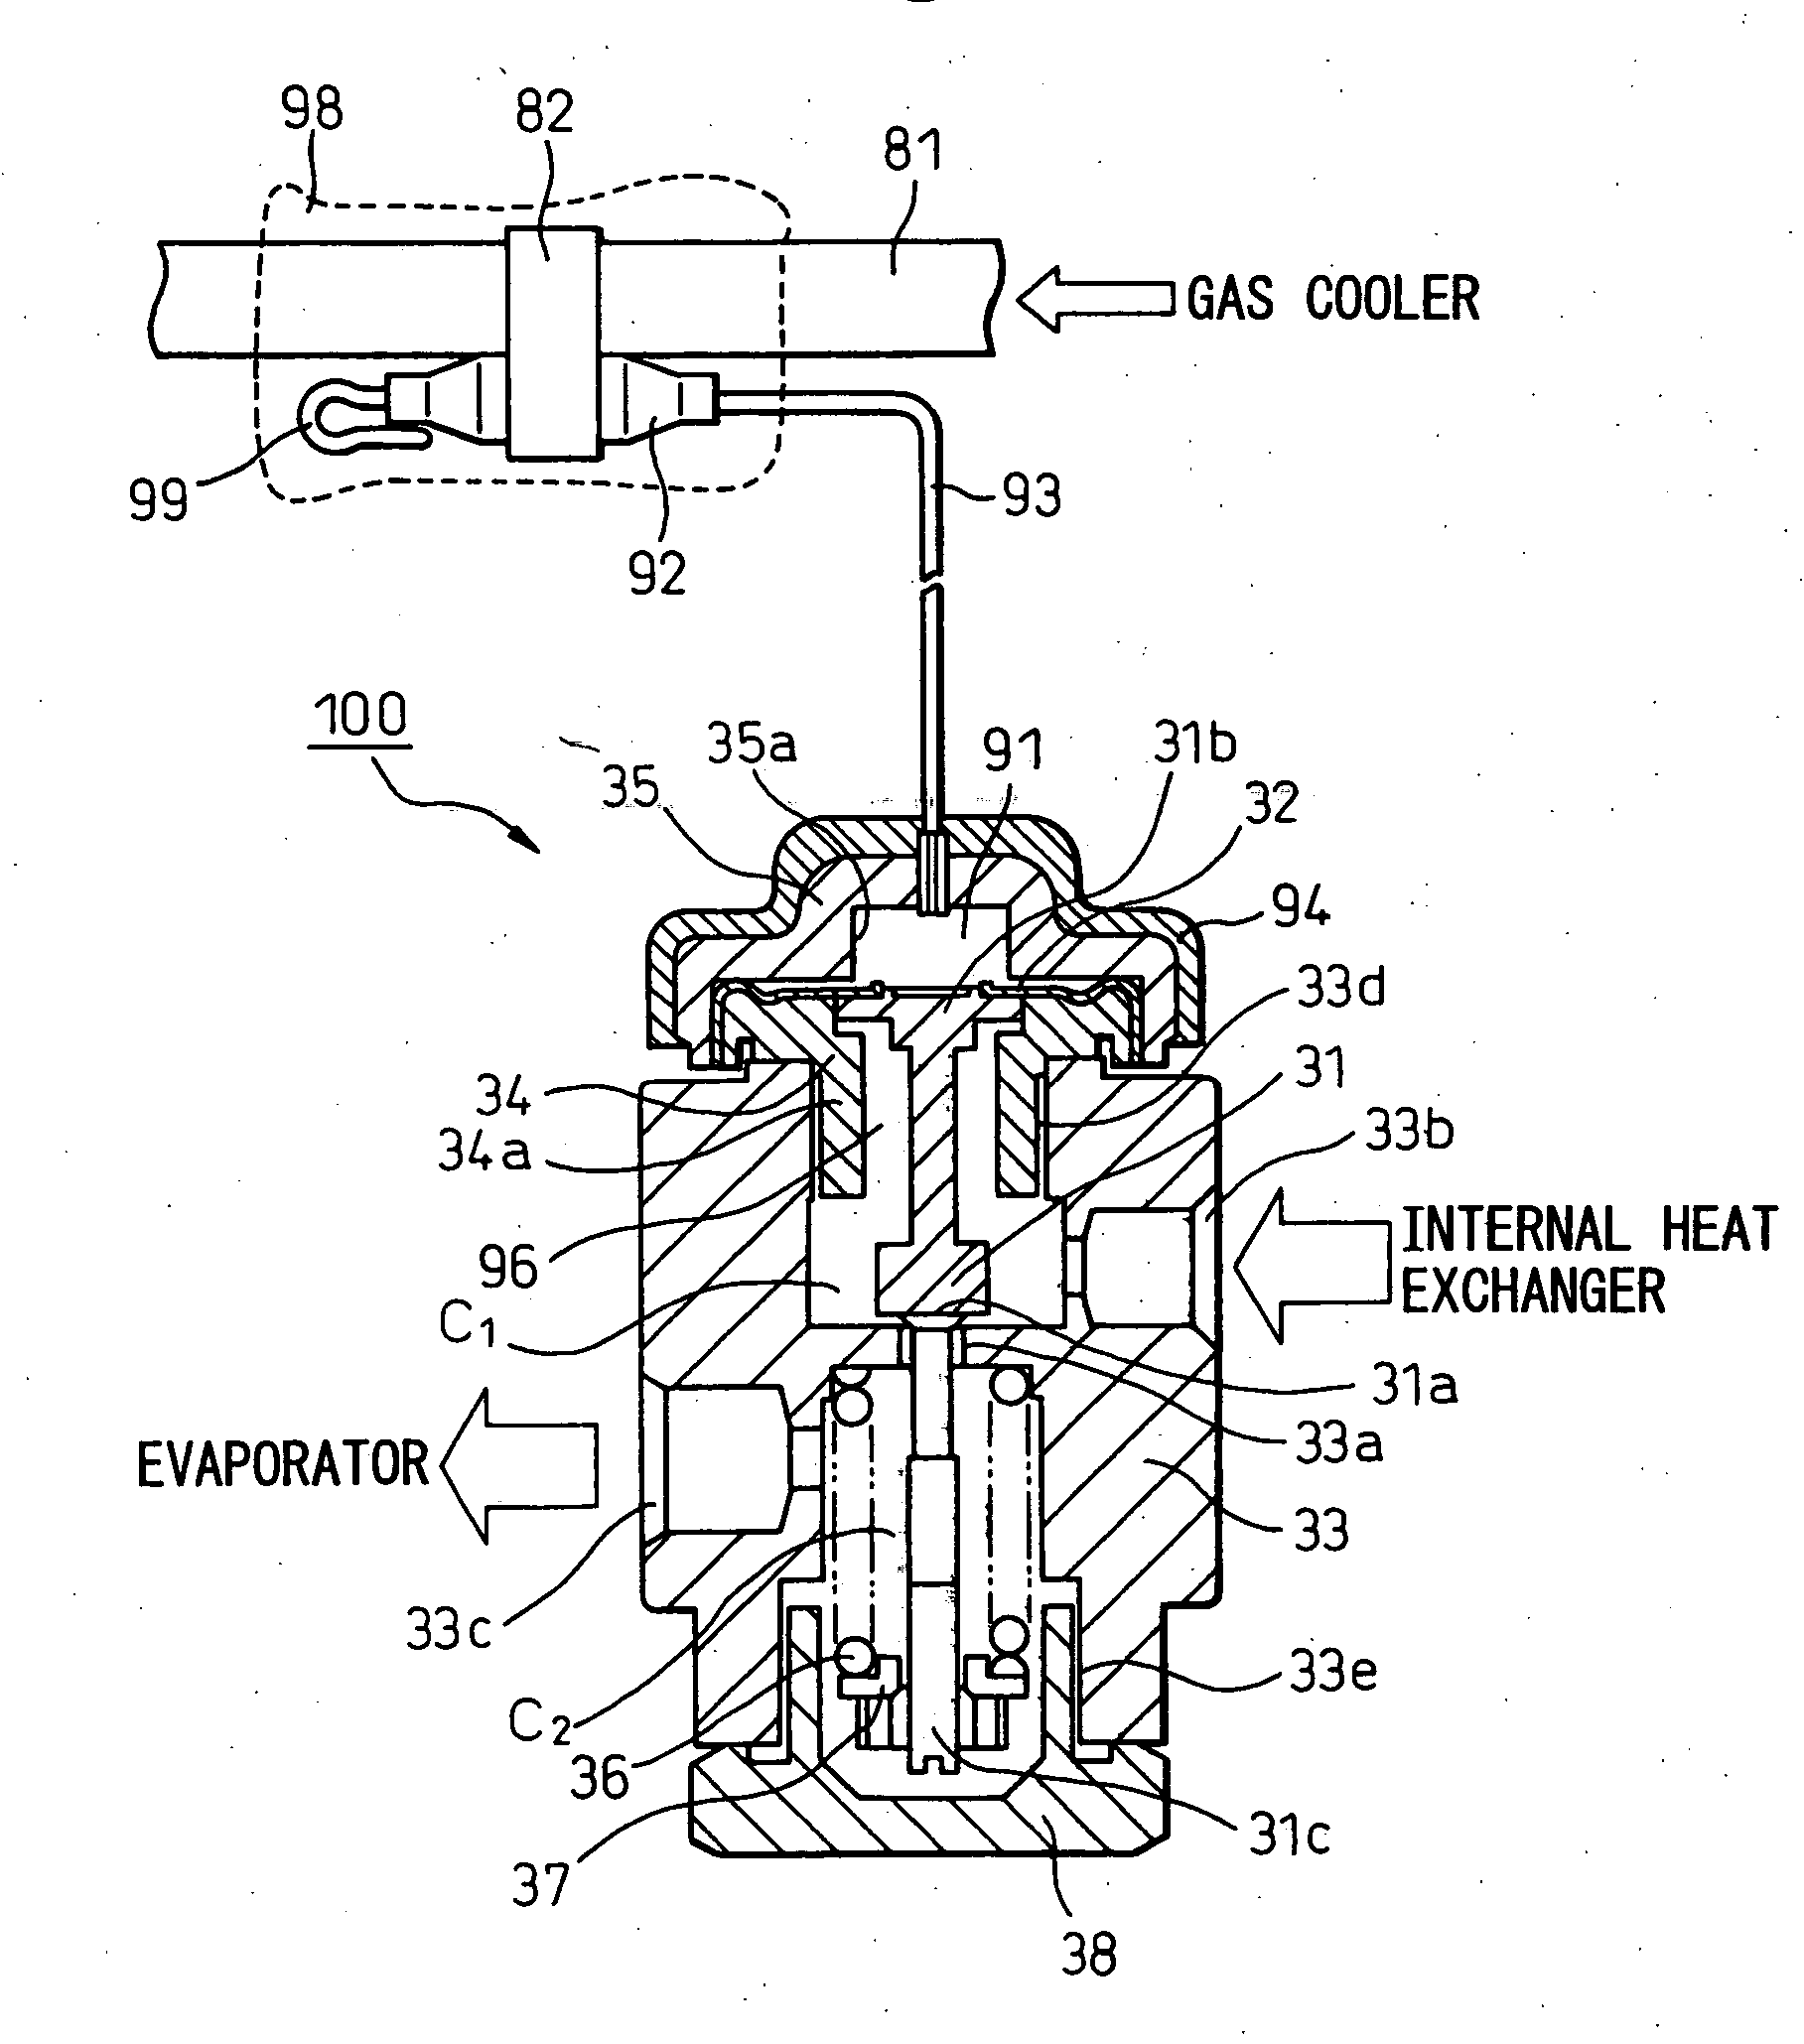 Pressure control valve for refrigeration cycle